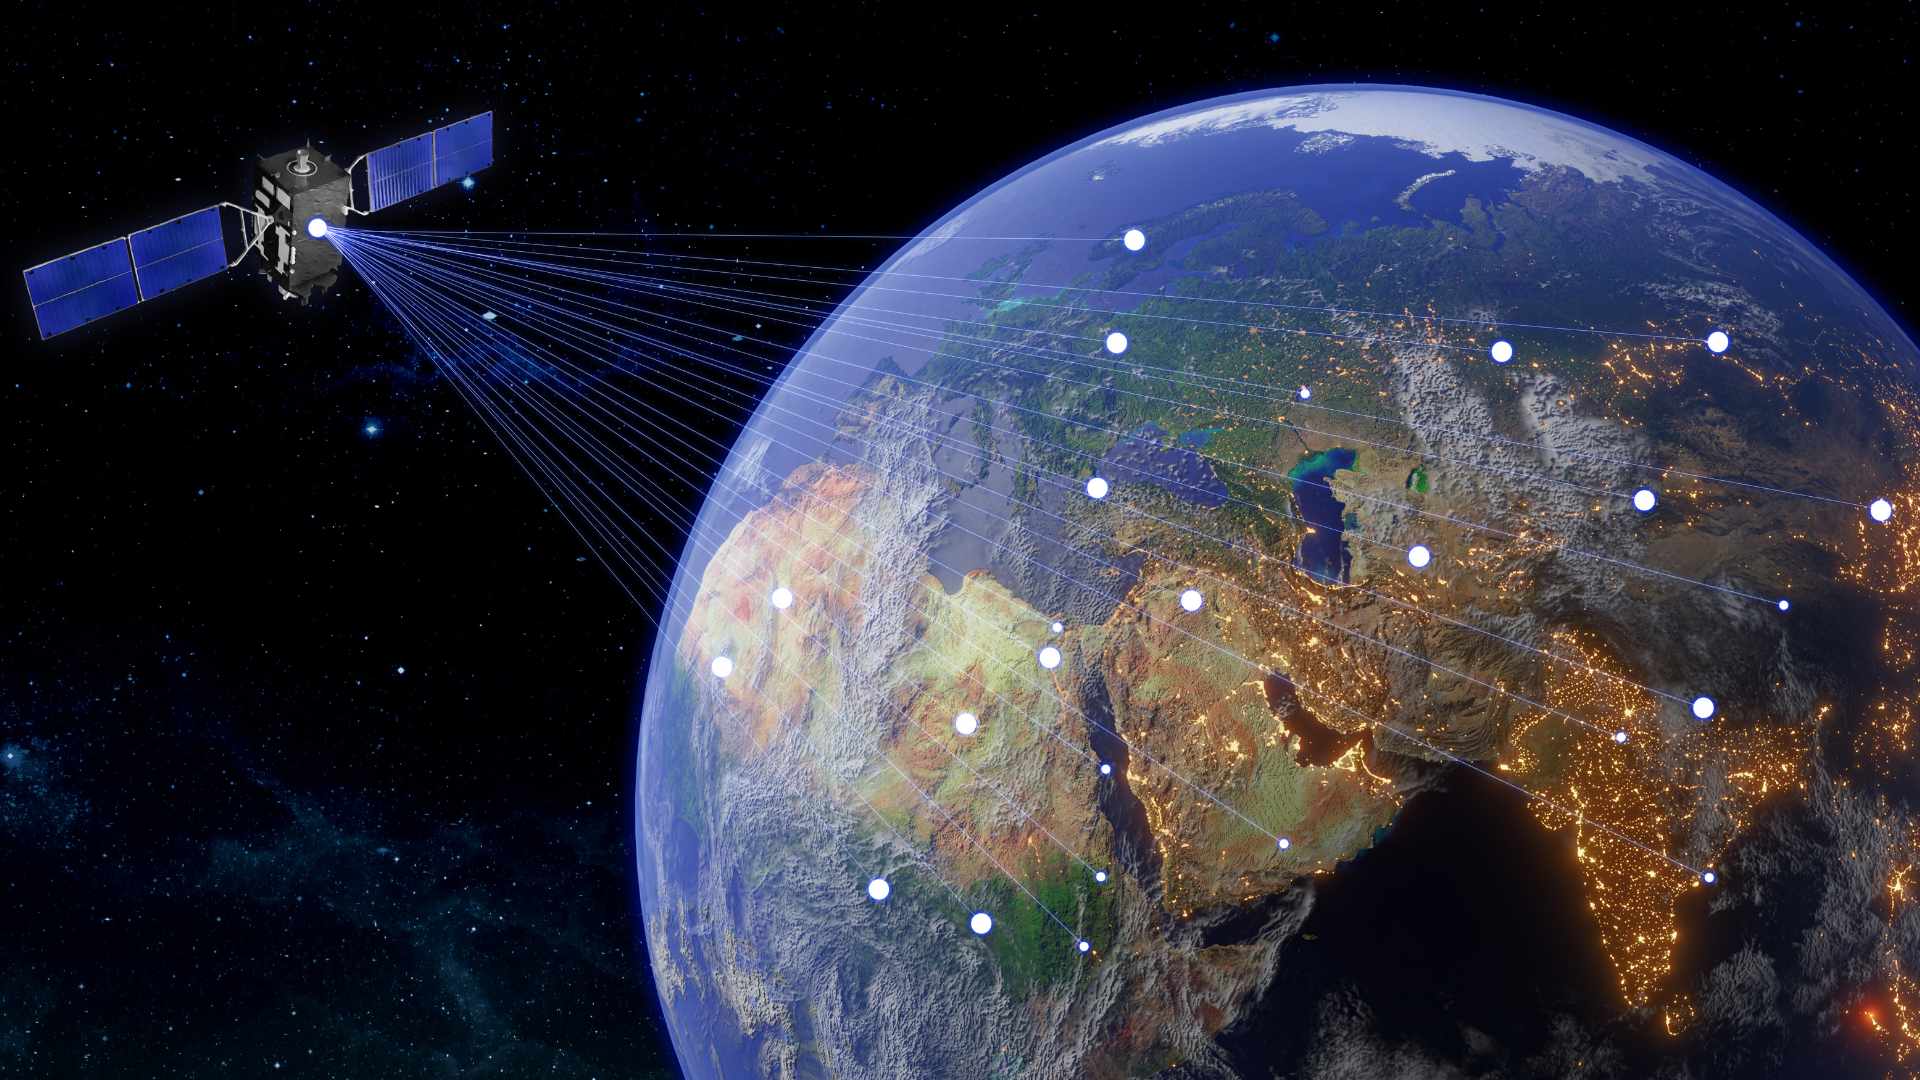 Satellite in orbit transmitting signals to points on earth